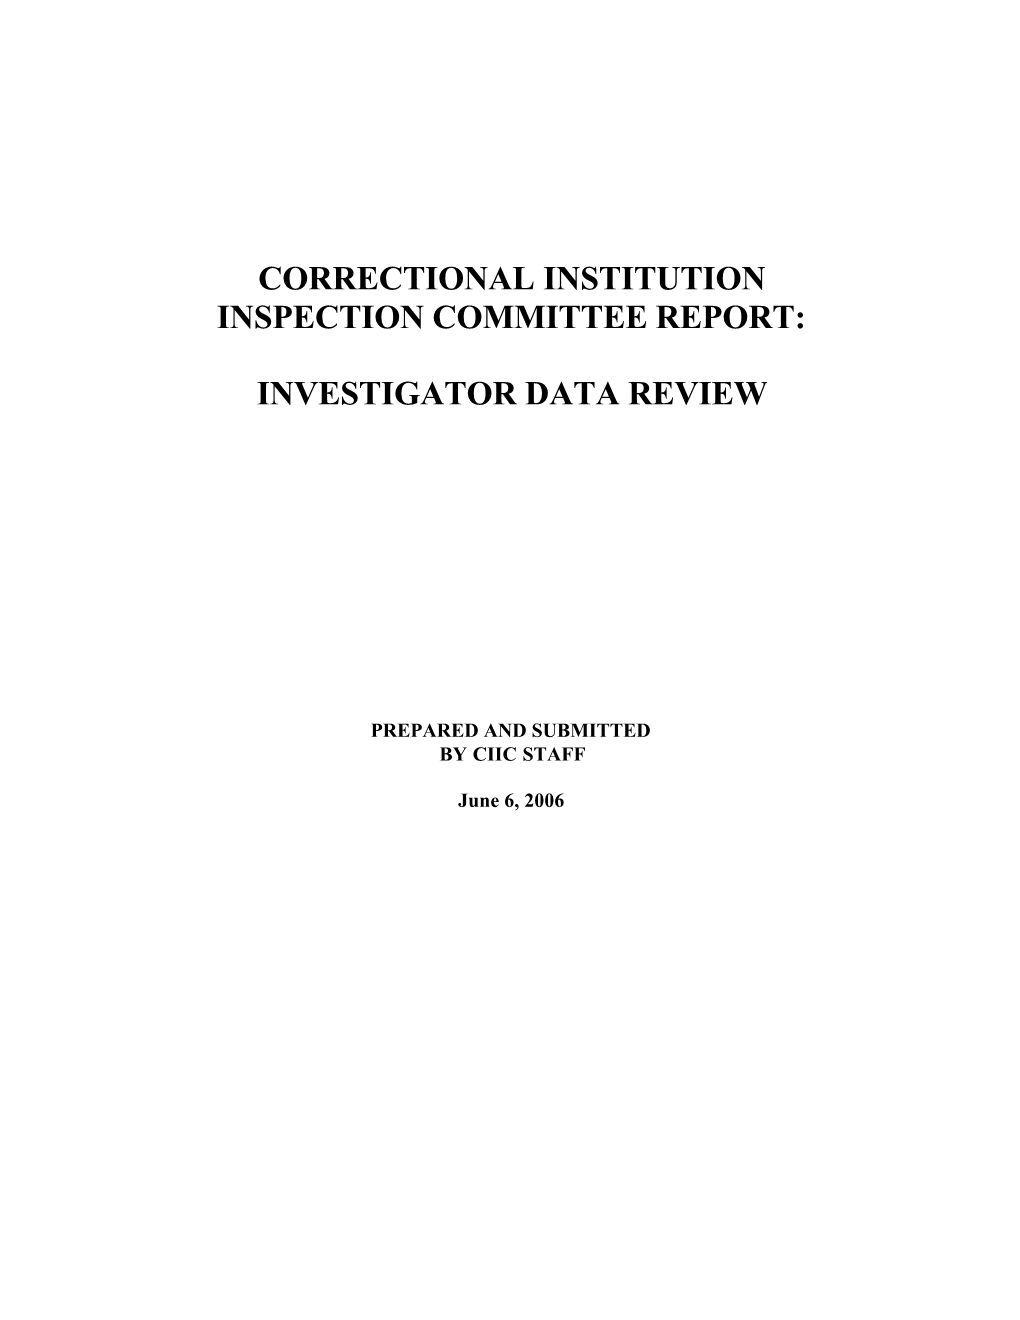 CIIC Inspection Committee Report: Investigator Data Review